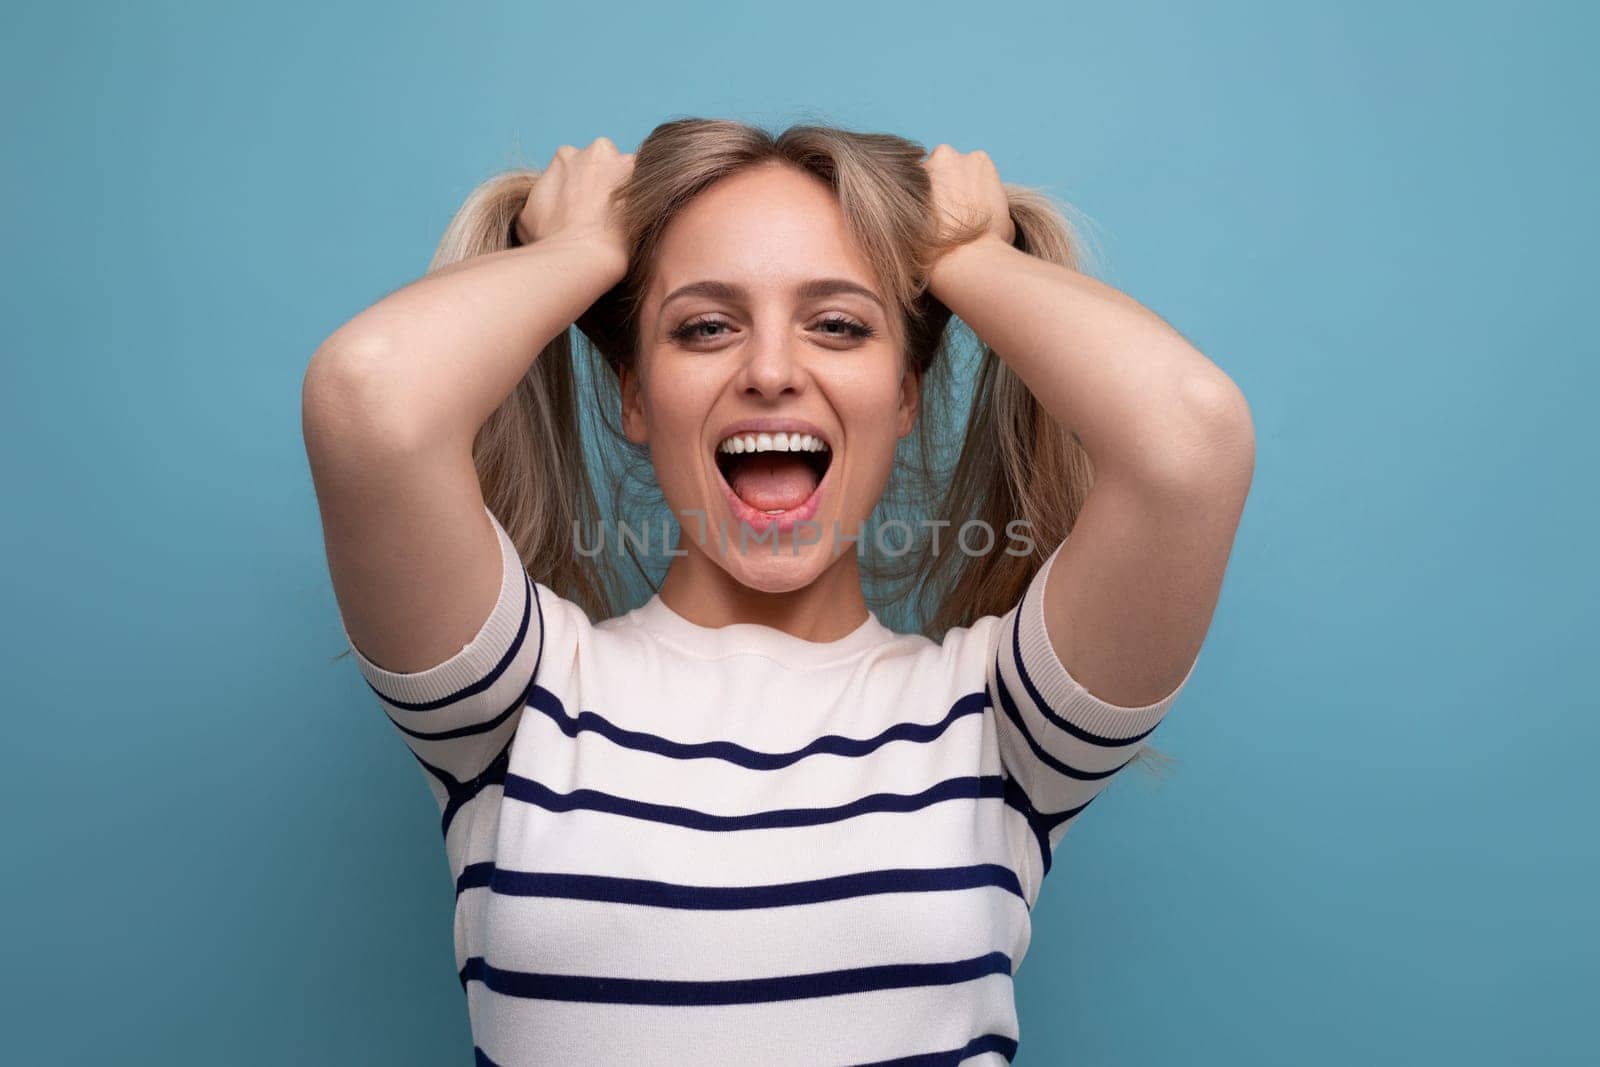 cheerful blond young woman holds her hair in her hands and laughs cutely on a blue background.